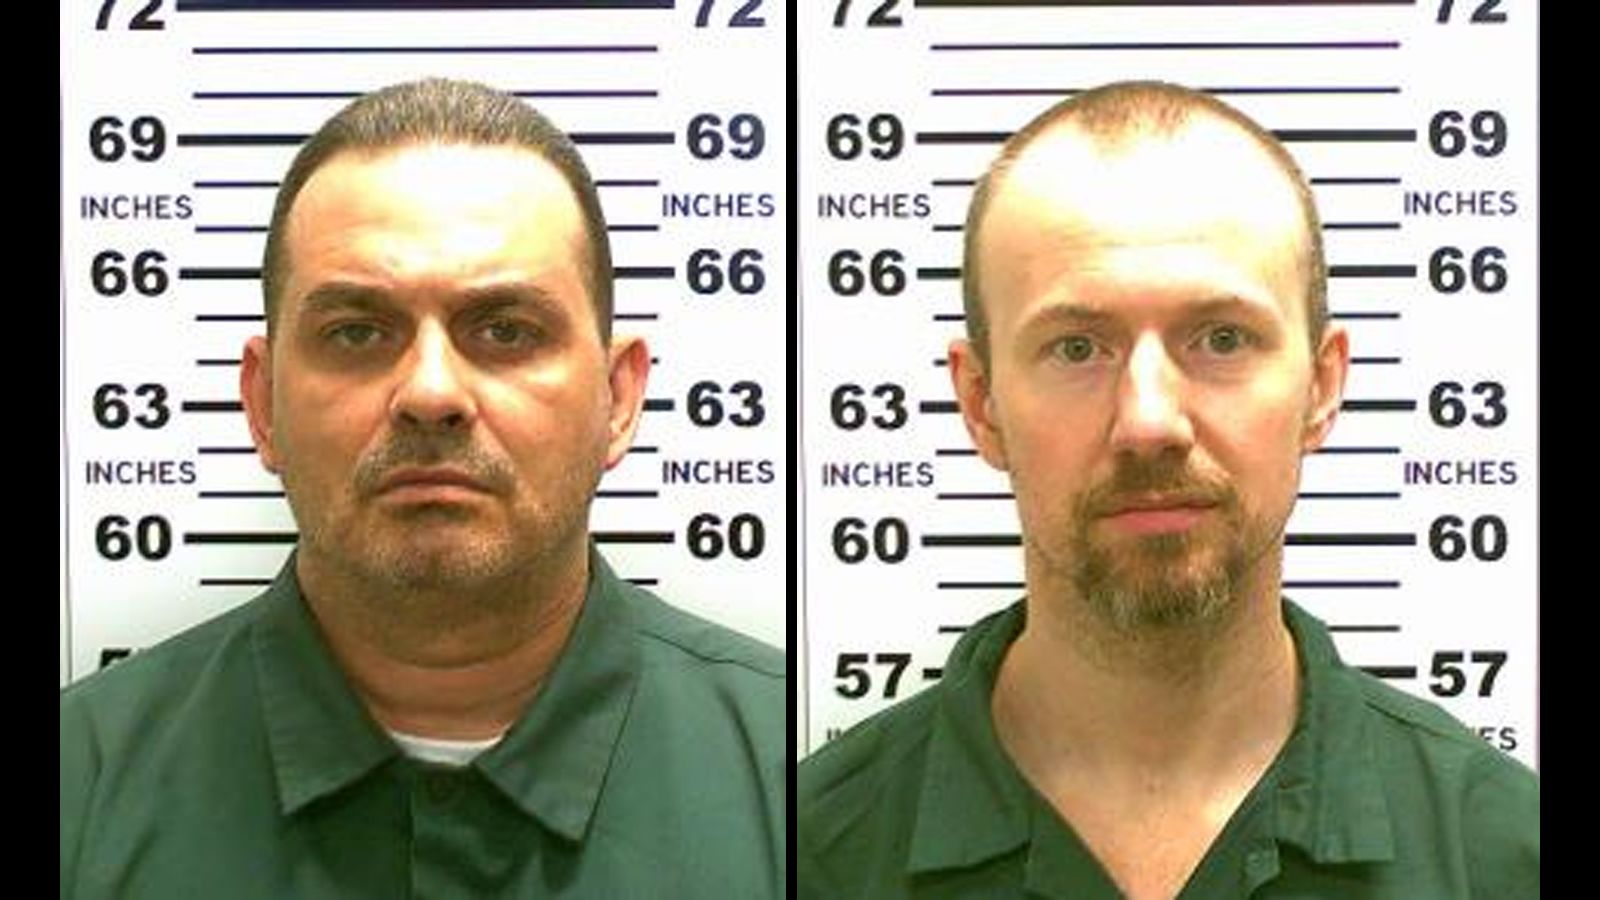 How Two Prisoners Escaped From A Maximum Security Prison - The New York  Times